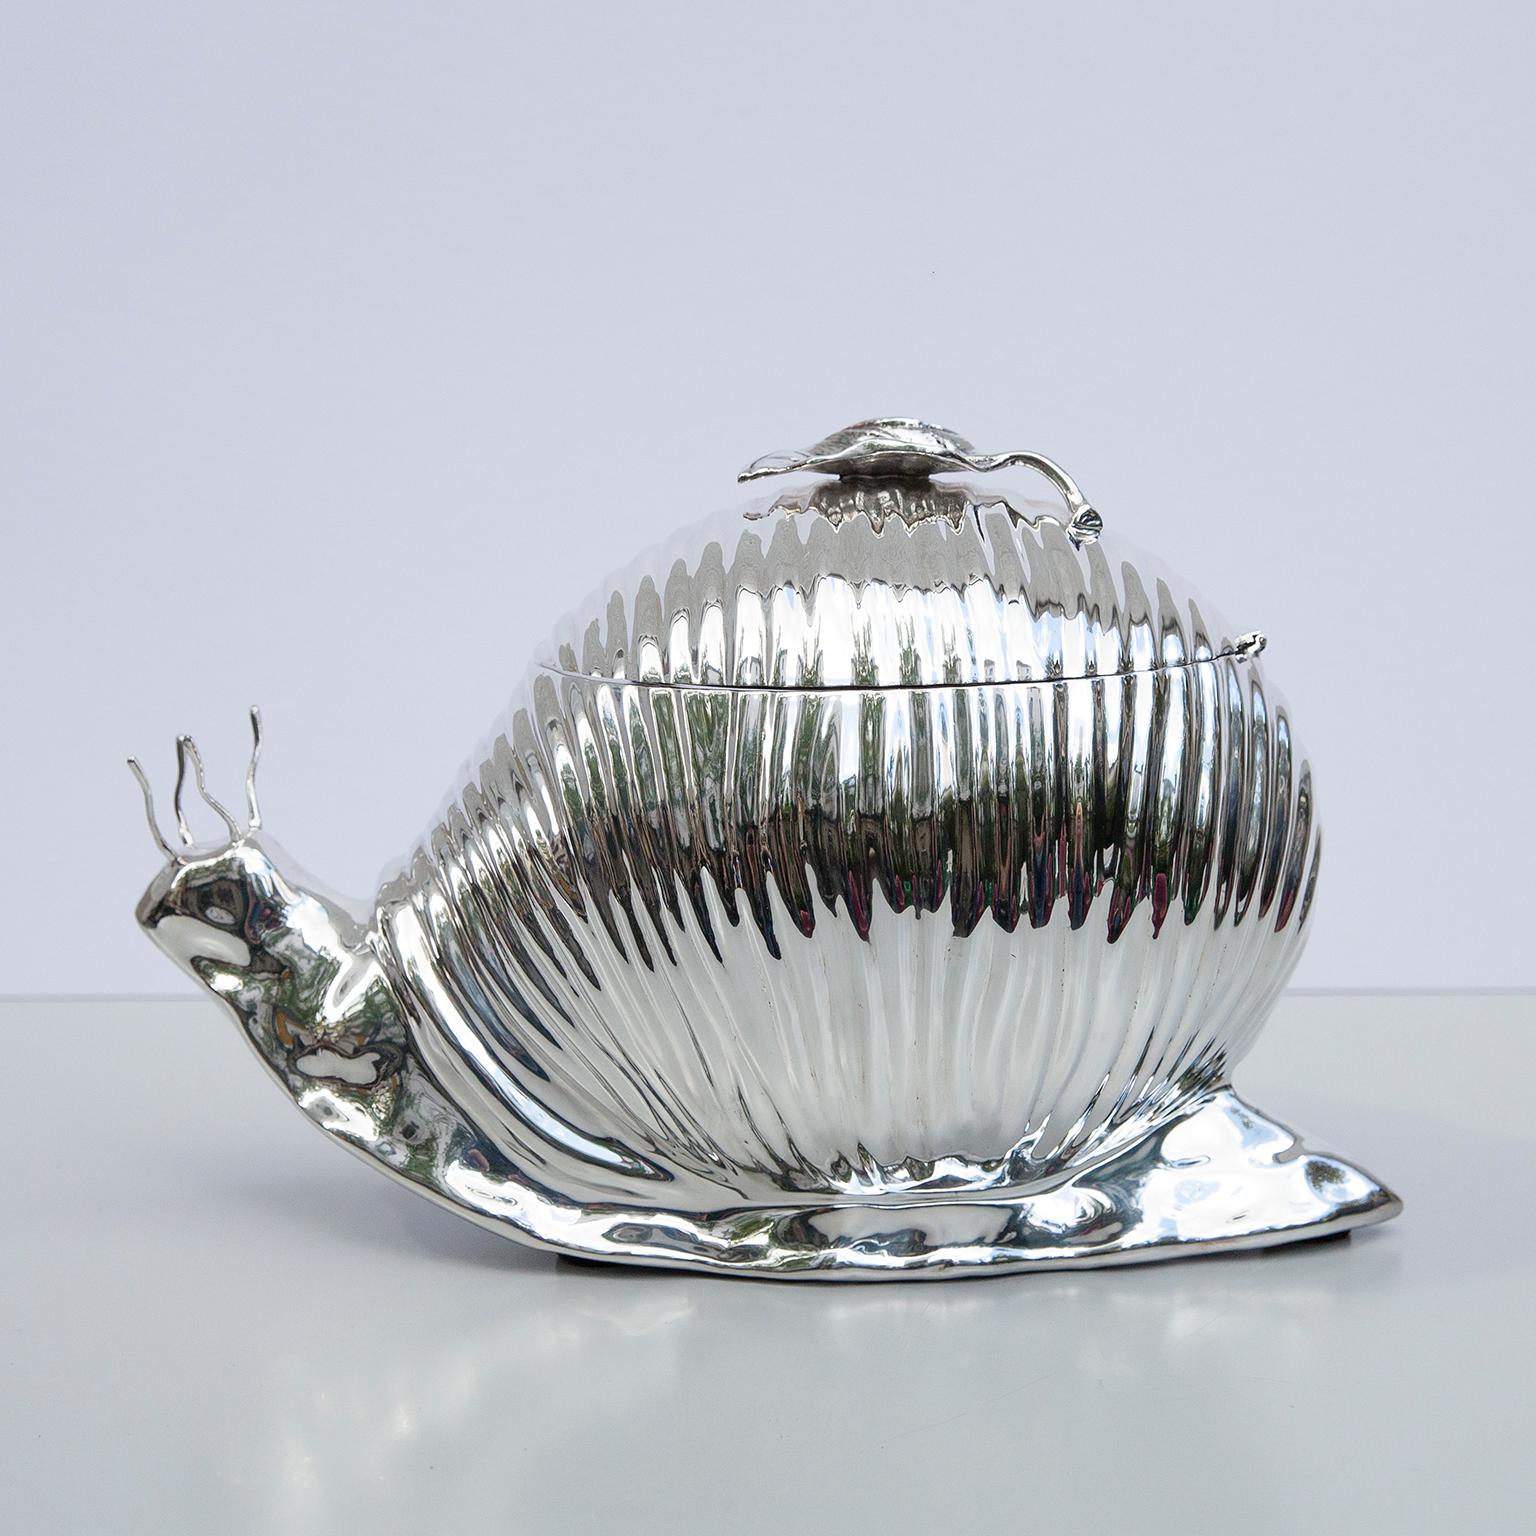 Late 20th Century Teghini Silver Plated Snail Ice Bucket, Italy, 1977